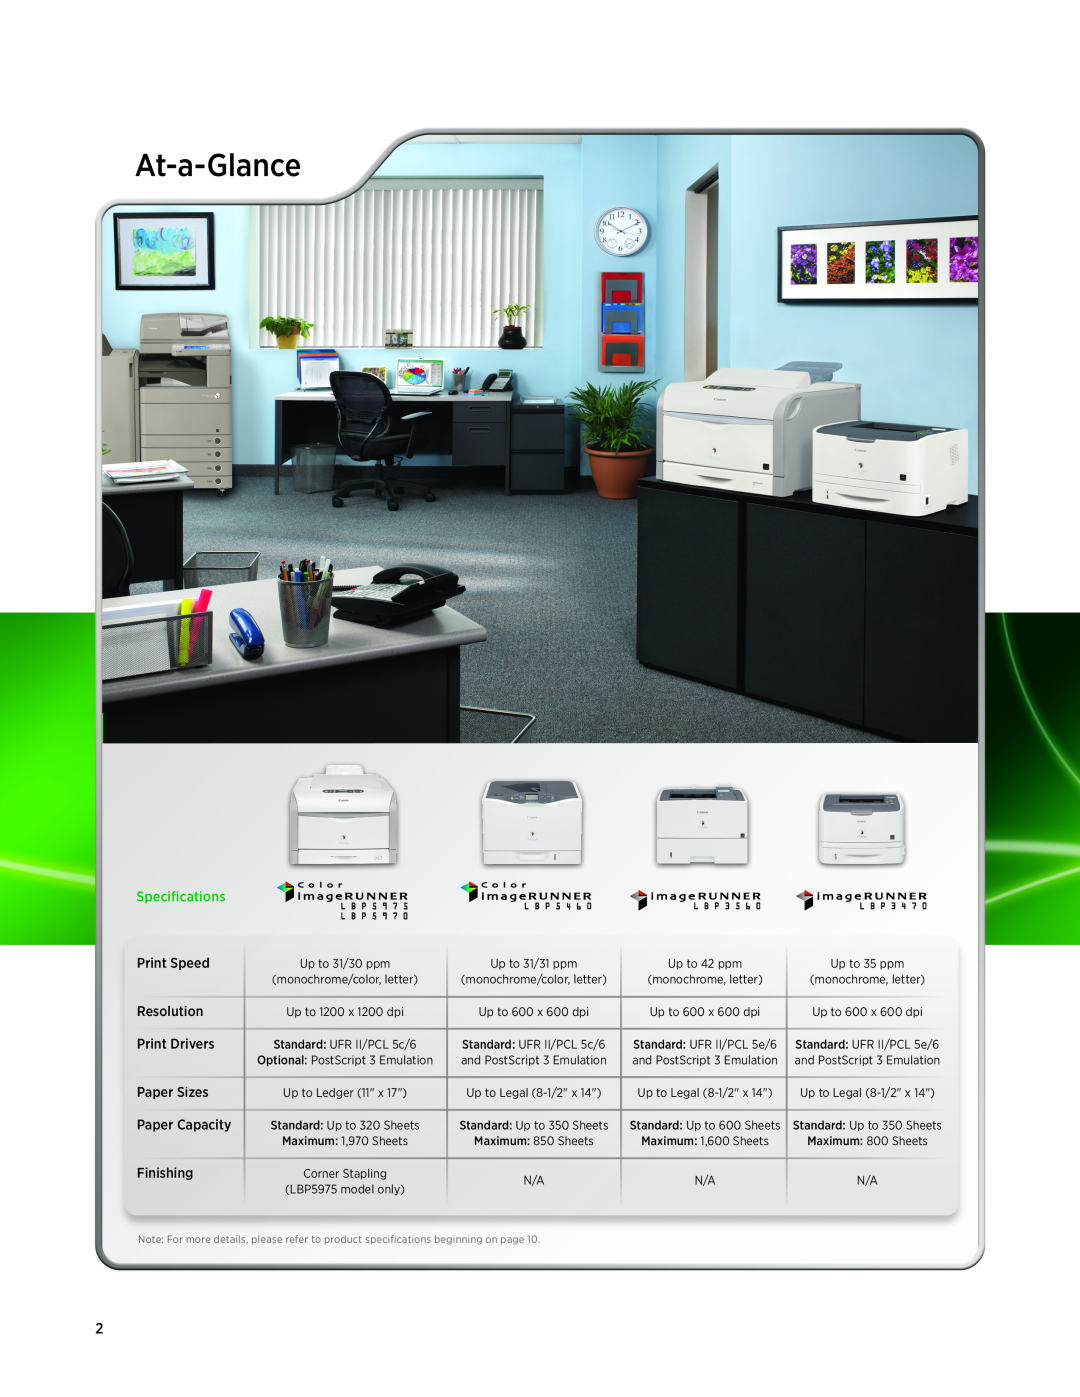 Canon LBP5975 At-a-Glance, Specifications, Print Speed, Resolution, Print Drivers, Paper Sizes, Paper Capacity, Finishing 